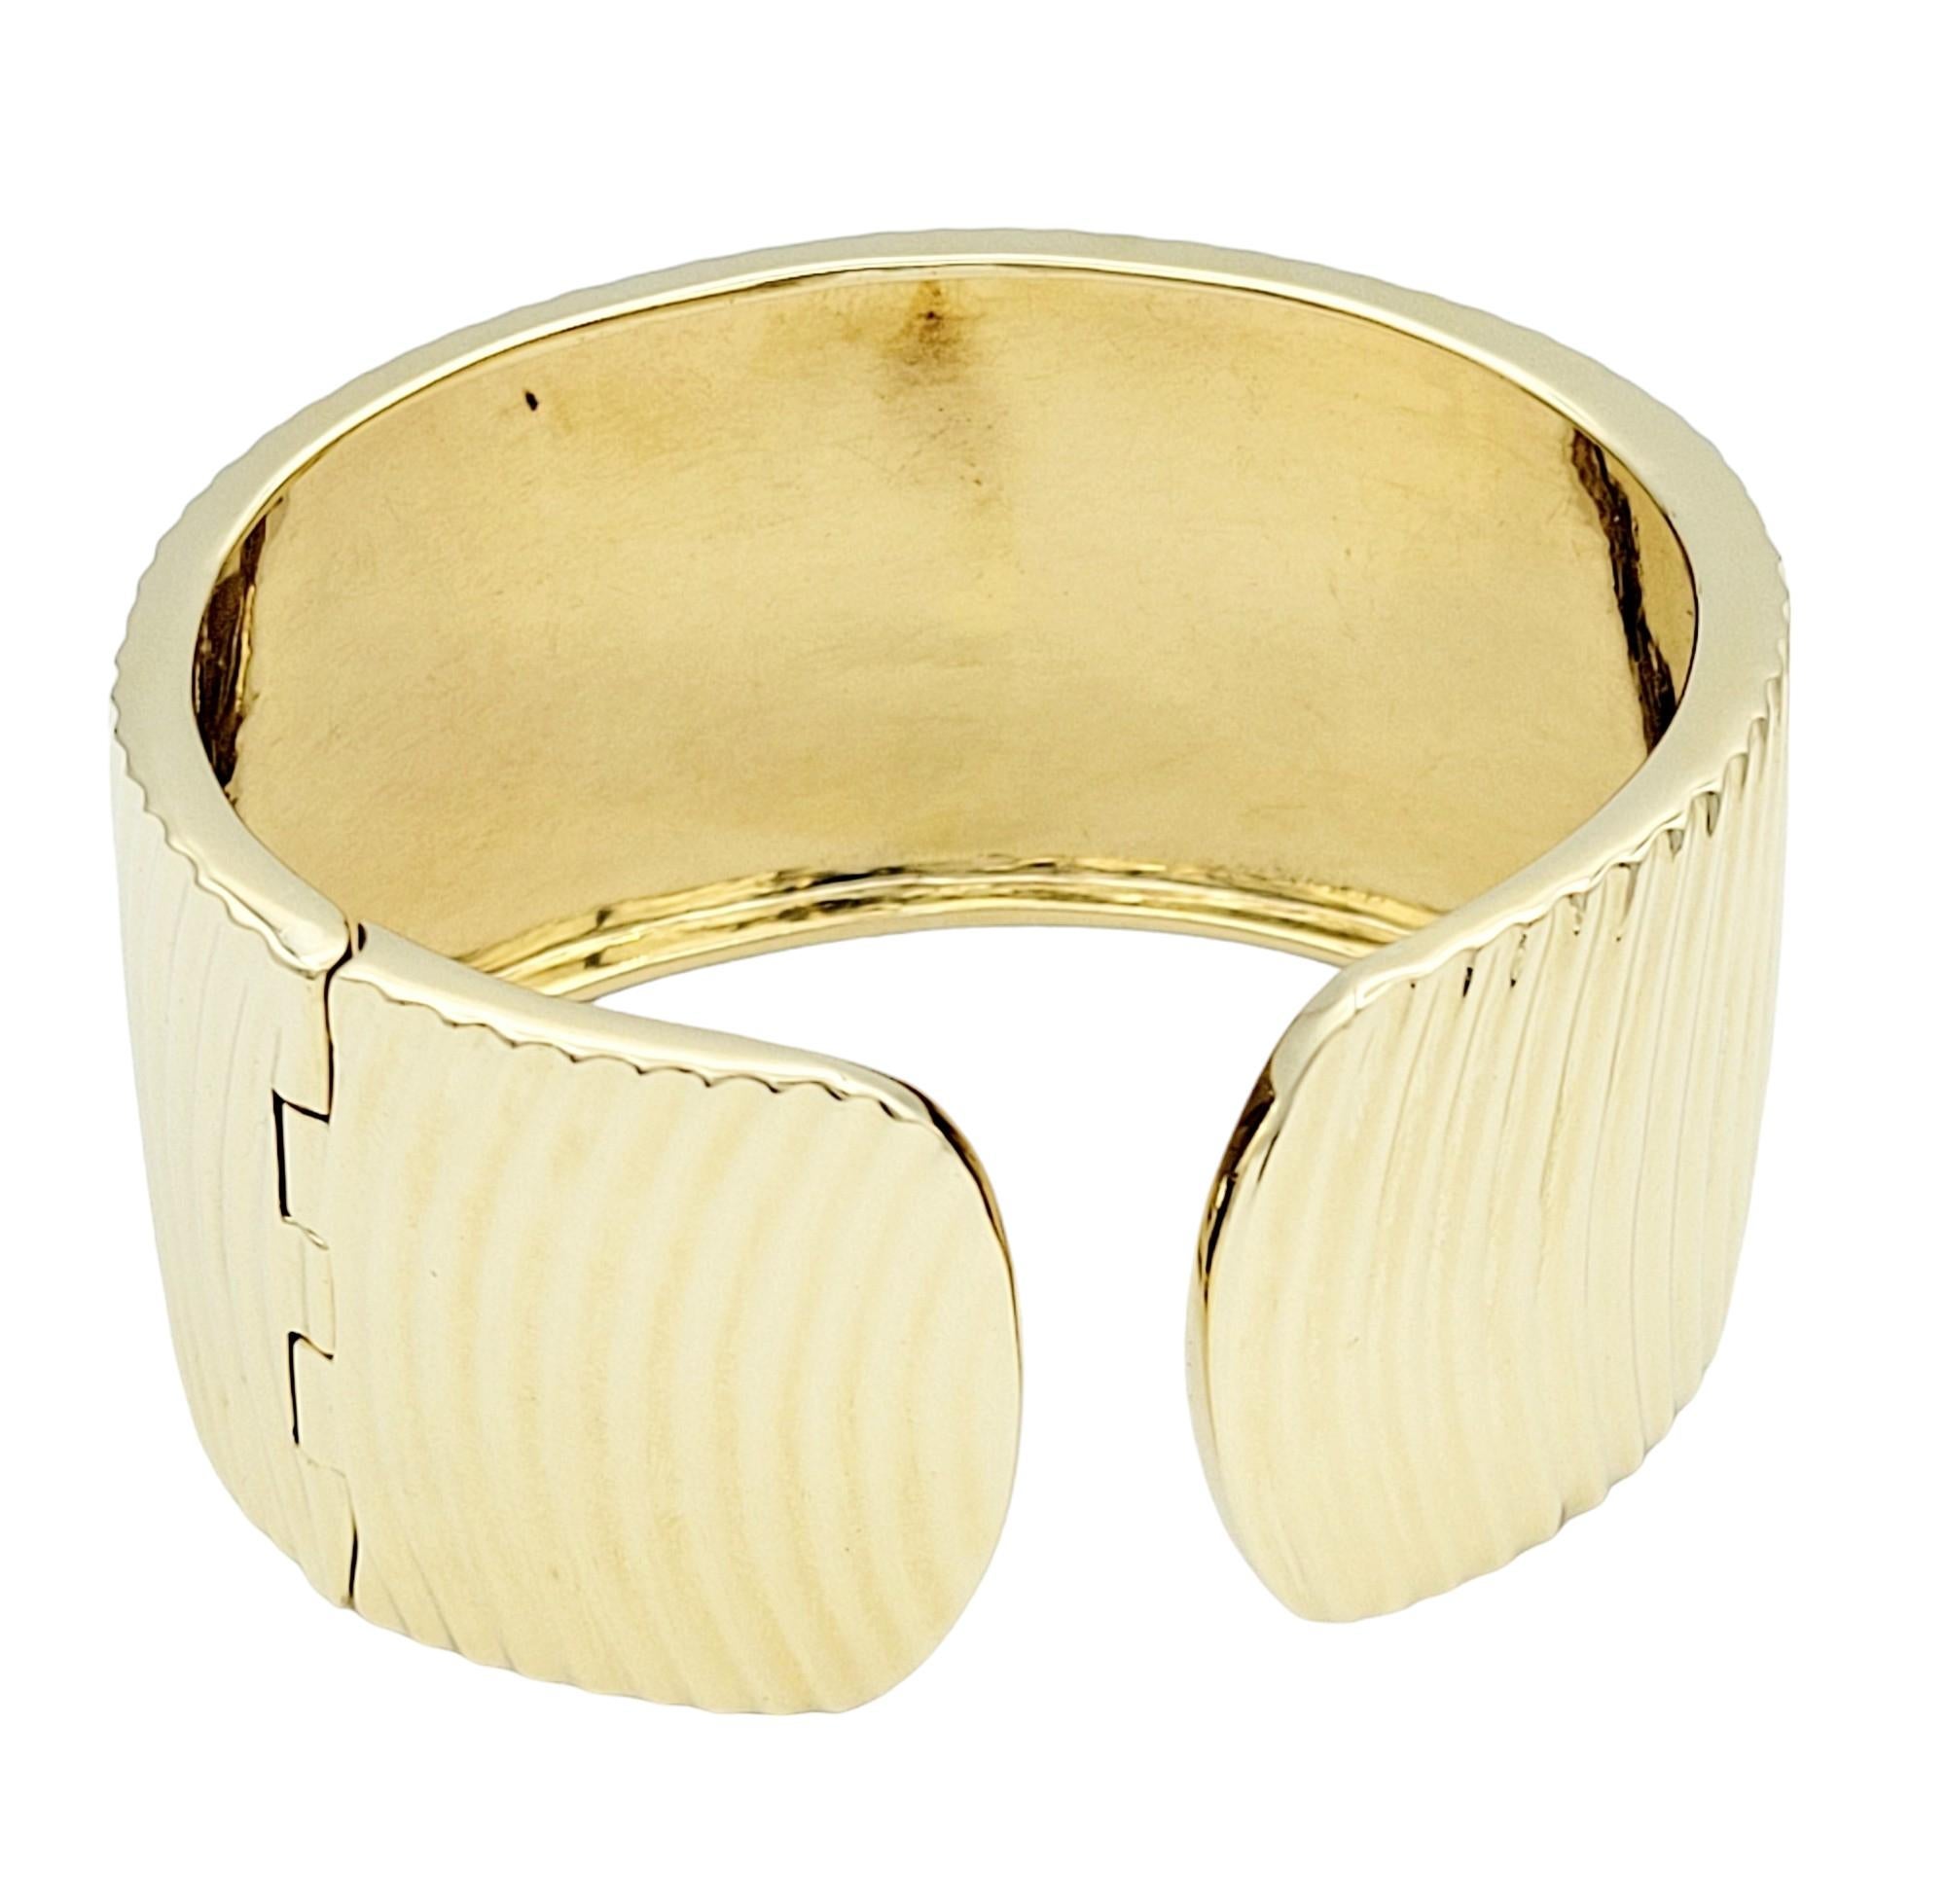 Wide Ridged Cuff Bracelet with Hinge Opening in Polished 14 Karat Yellow Gold  In Good Condition For Sale In Scottsdale, AZ